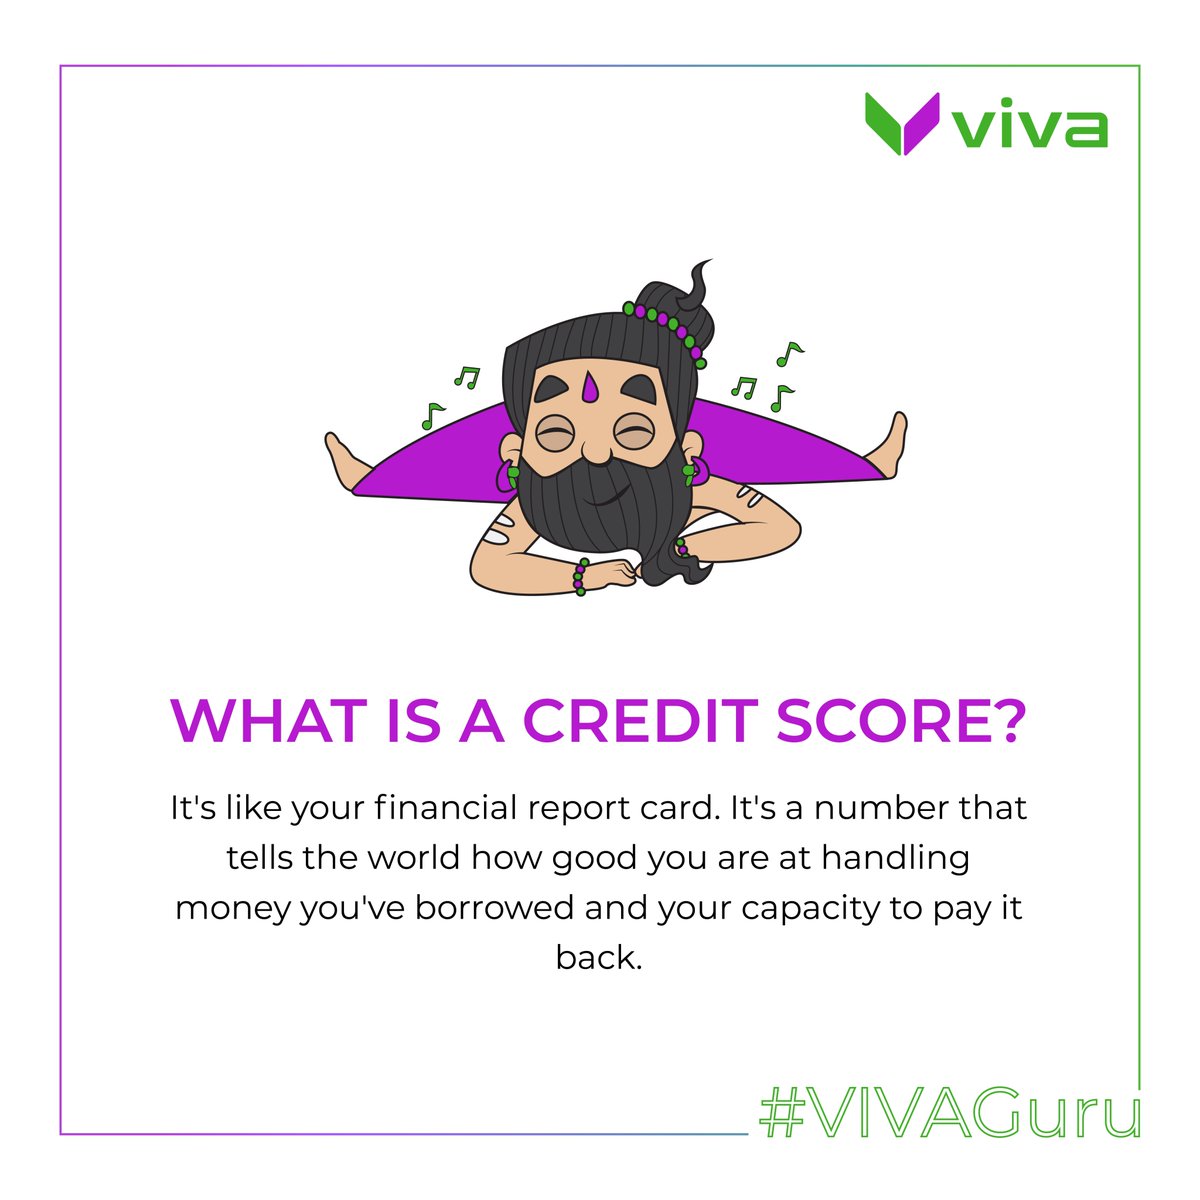 Find out how smart you are with your credit score!  📈💯
Don't let inaccuracies in your report drag you down. Take control of your credit and protect your financial future! 💰💪

#CreditScore #InterestFreeLoan #InterestFreeCredit #FinancialKnowledge #VivaGuru #VivaMoney #Viva